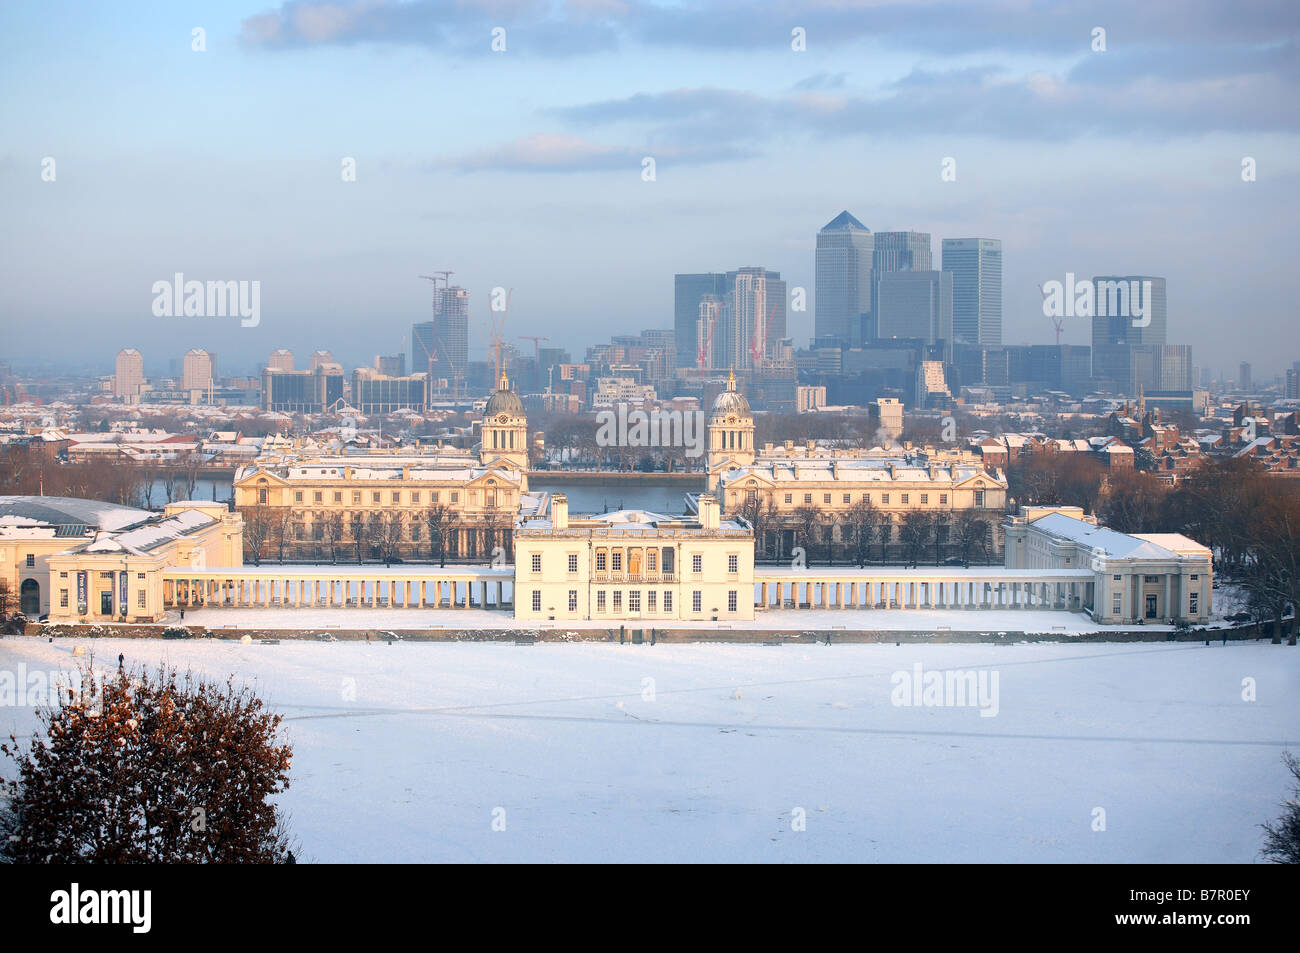 Landscape view of Greenwich and Docklands area of London, UK Stock Photo